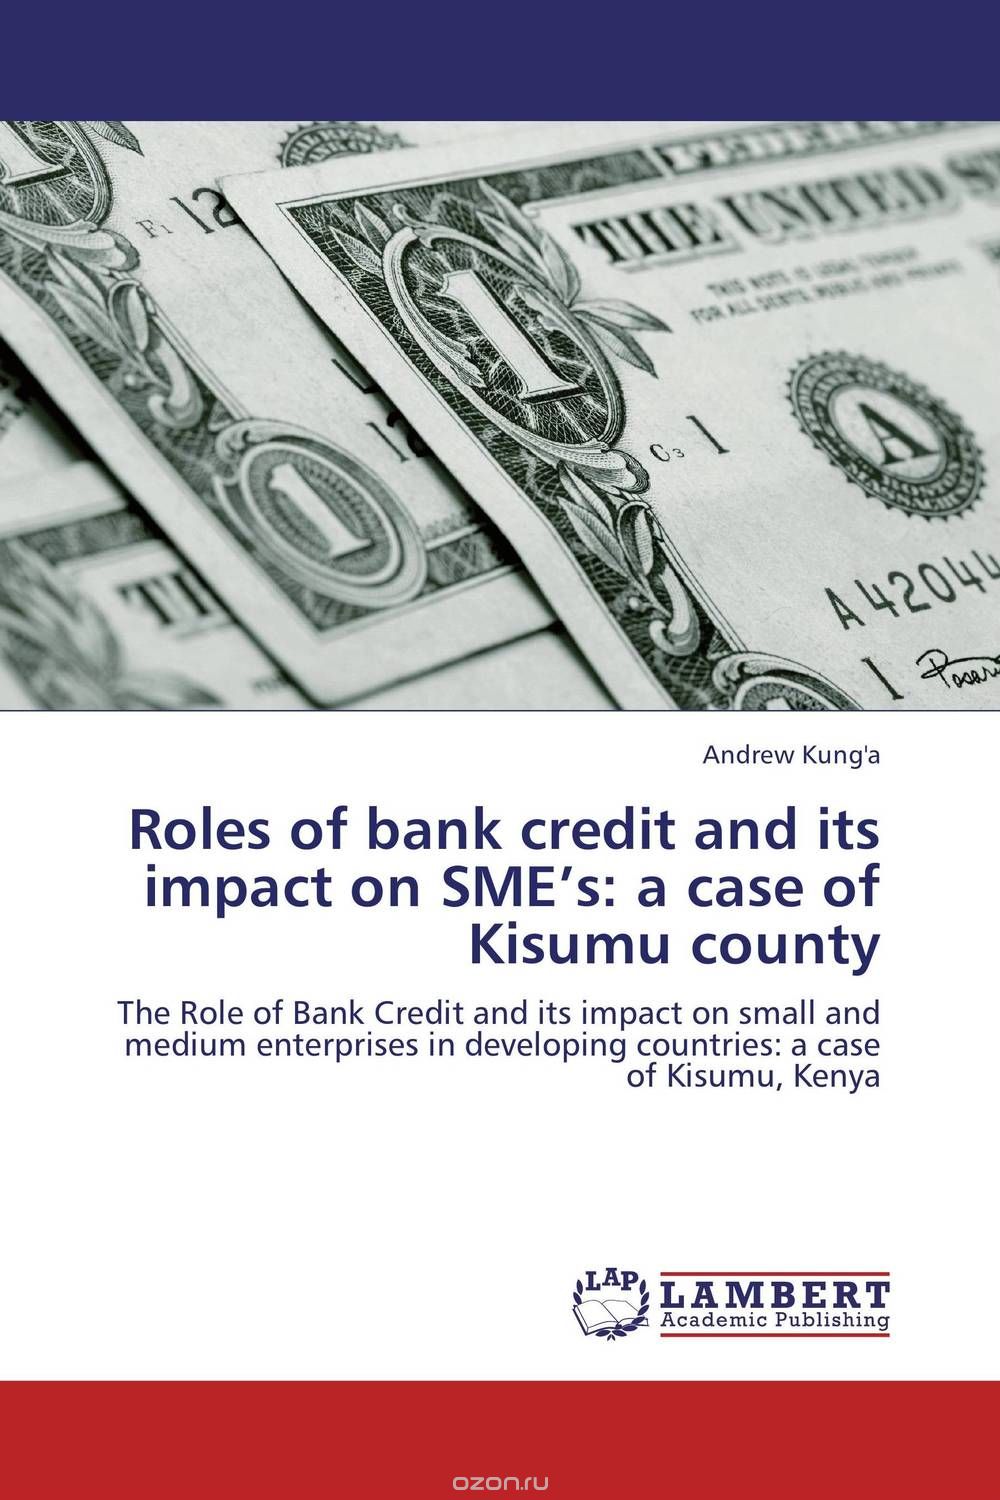 Скачать книгу "Roles of bank credit and its impact on SME’s: a case of Kisumu county"